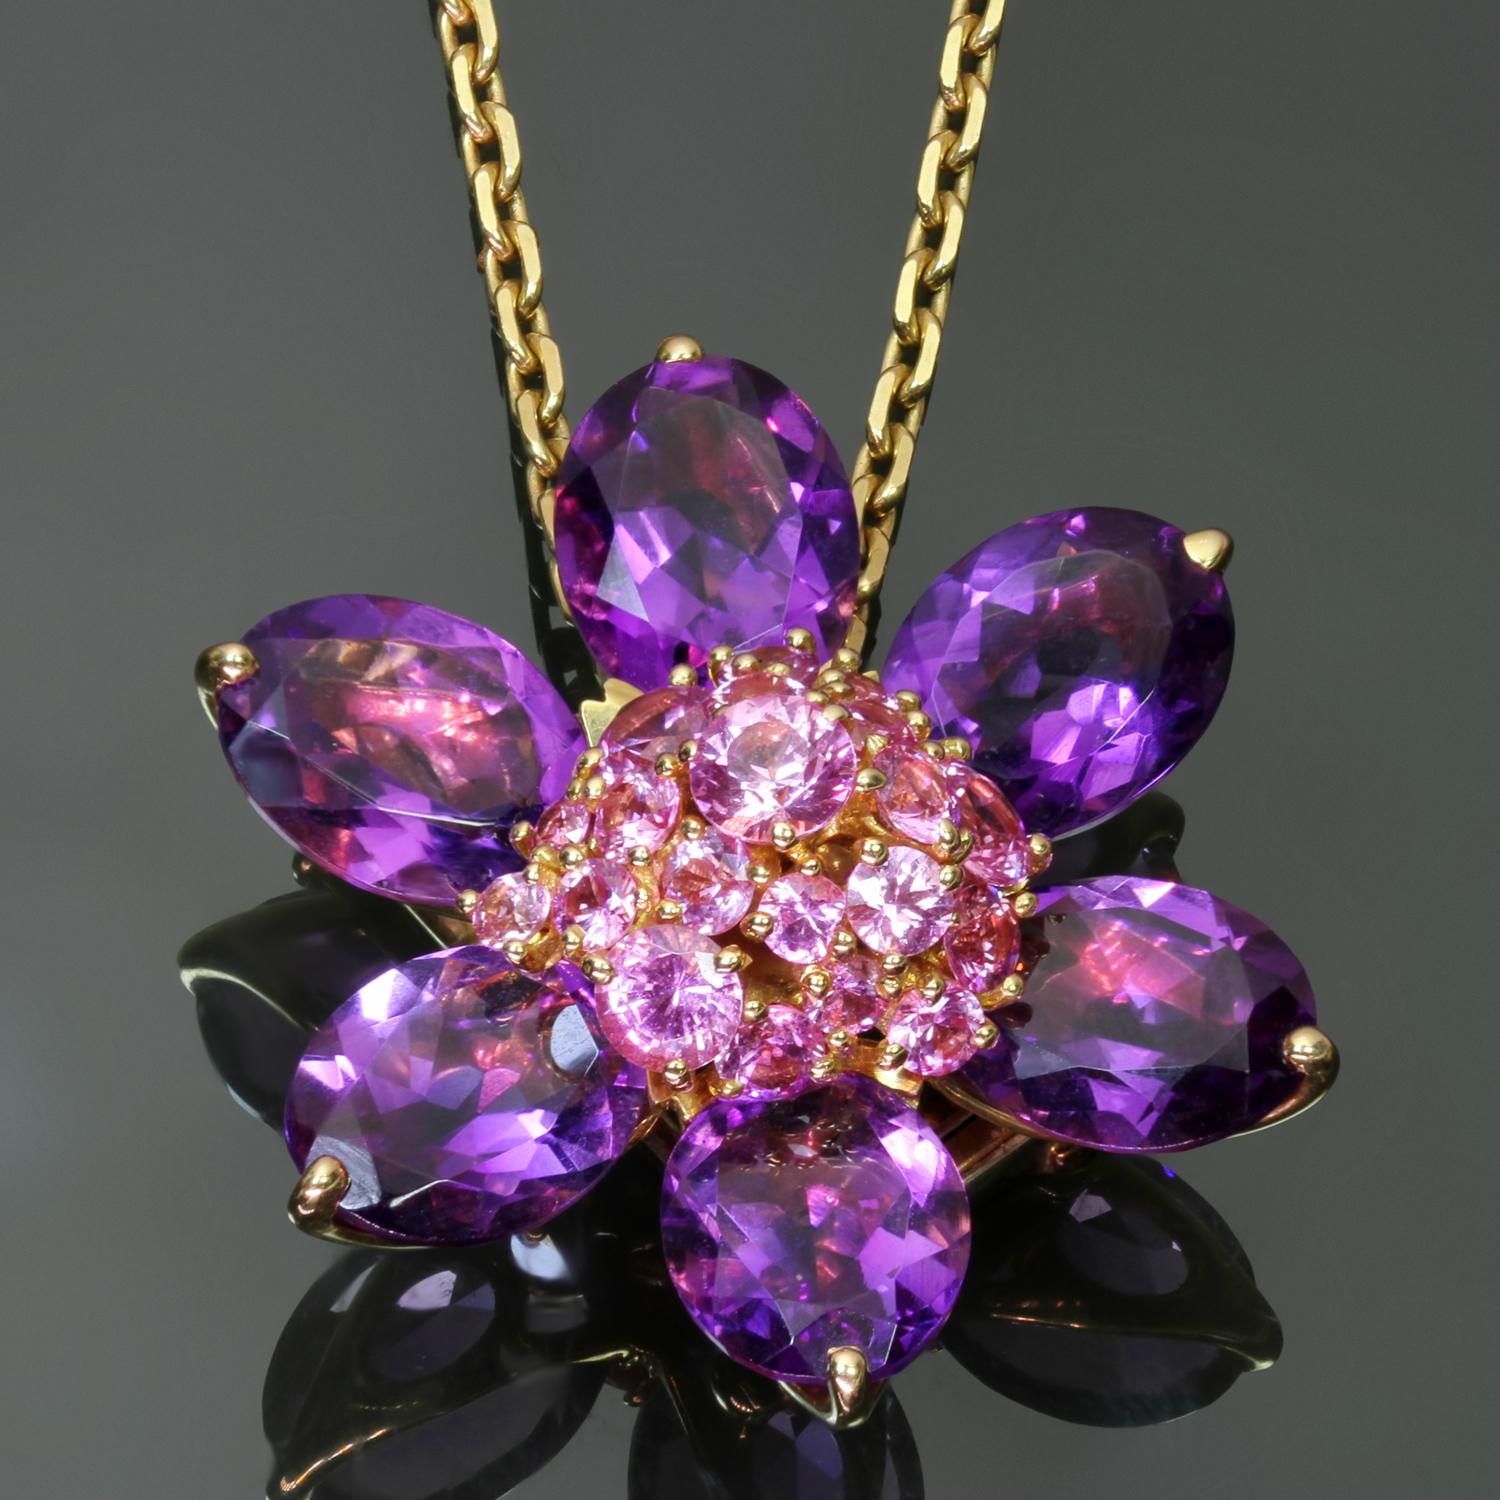 This stunning Van Cleef & Arpels brooch/pendant necklace from the vibrant Hawaii collection is crafted in 18k yellow gold and features a five-petal flower composed of faceted amethysts and a cluster of faceted pink sapphires. Made in France circa